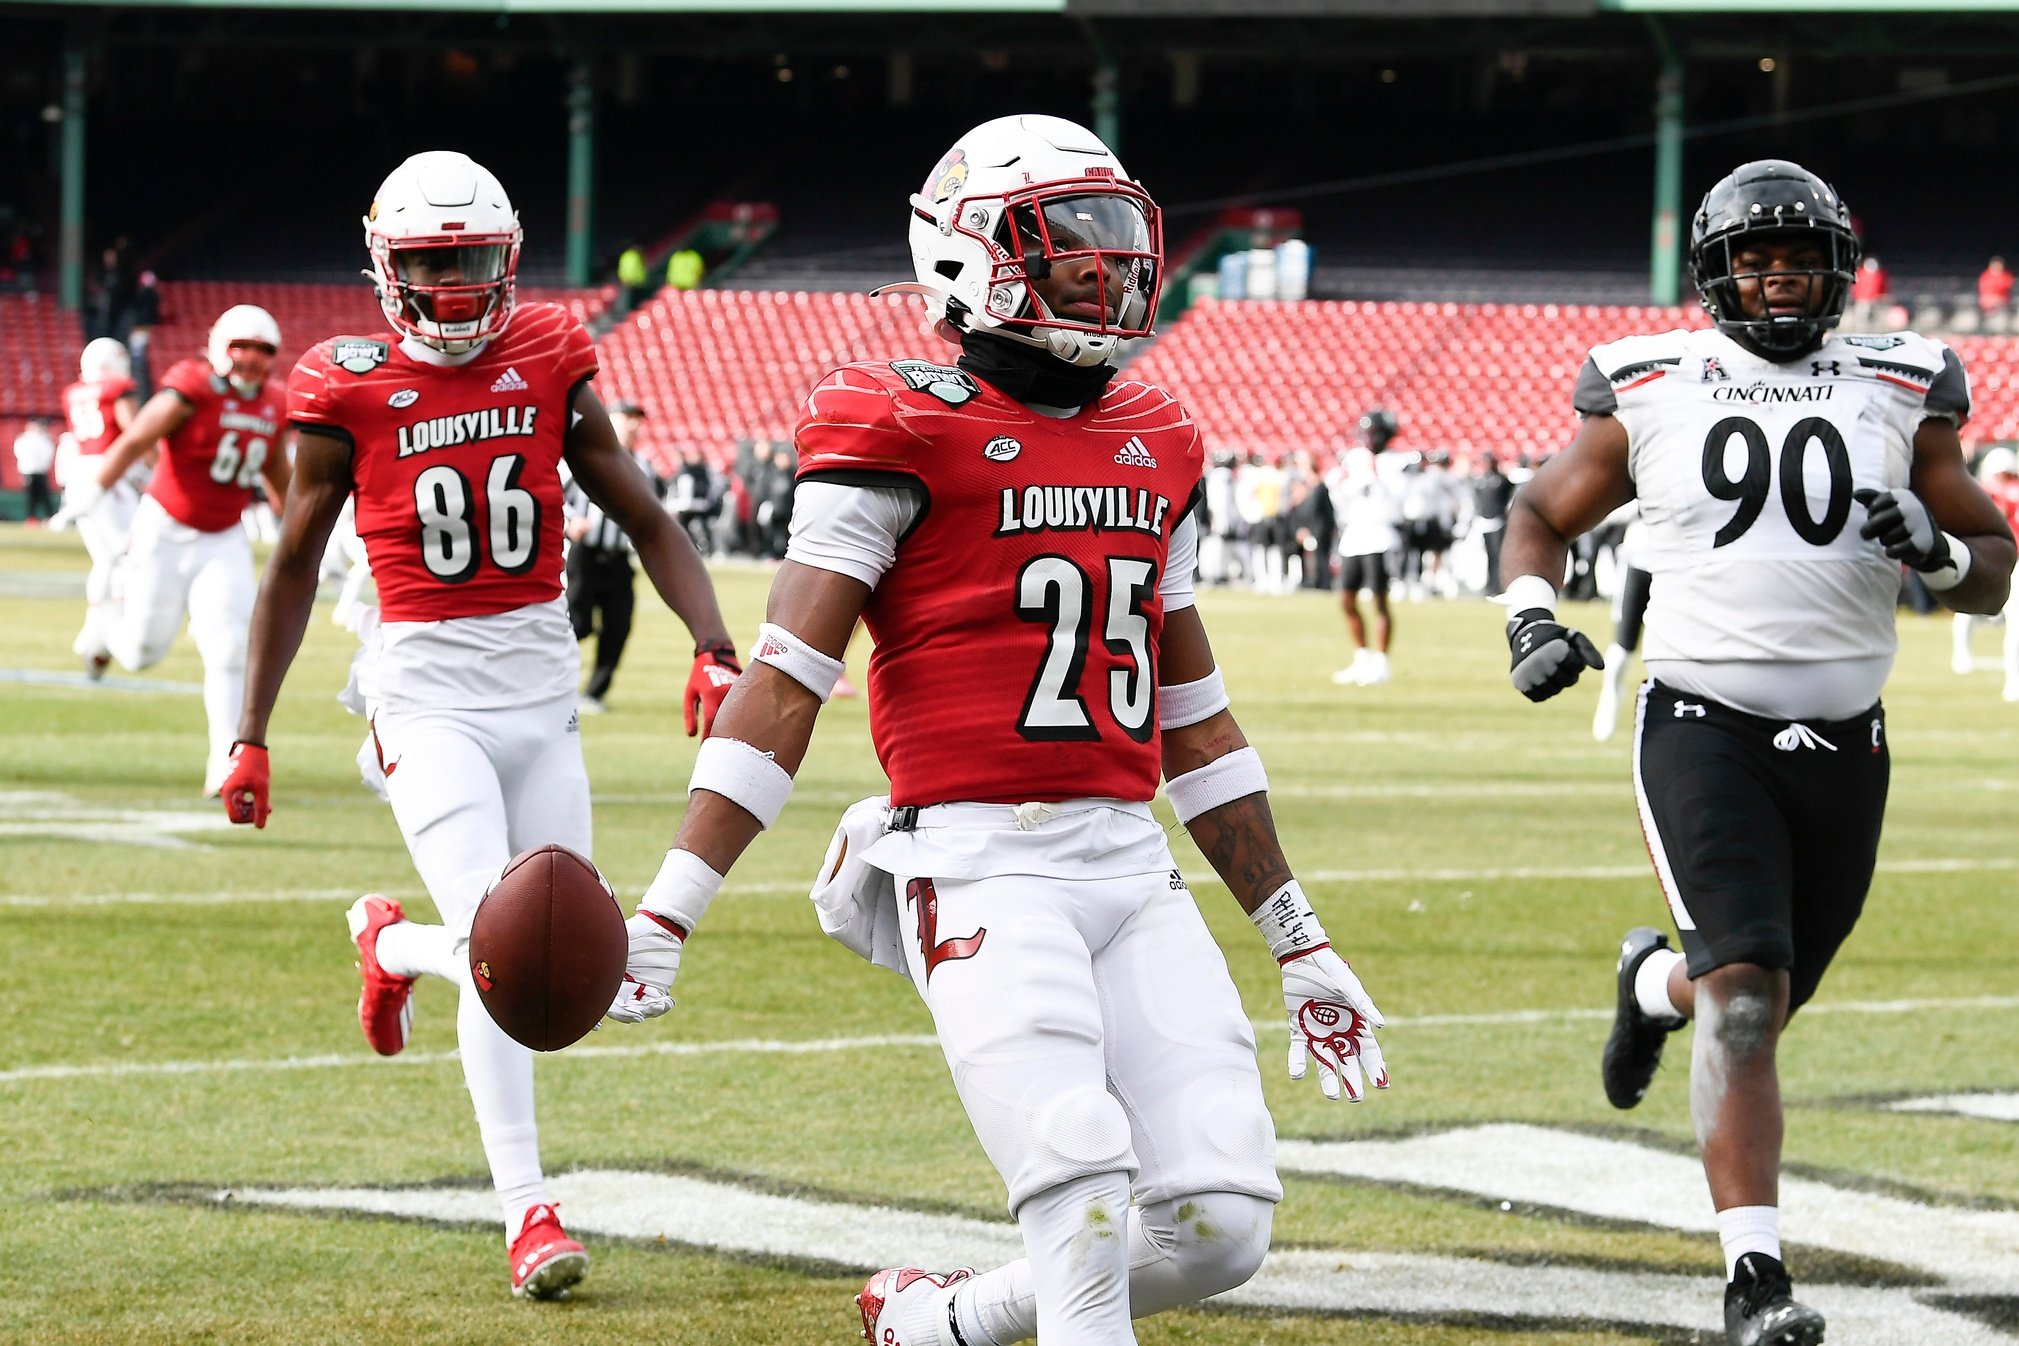 Louisville Cardinals Preview: Roster, Prospects, Schedule, and More